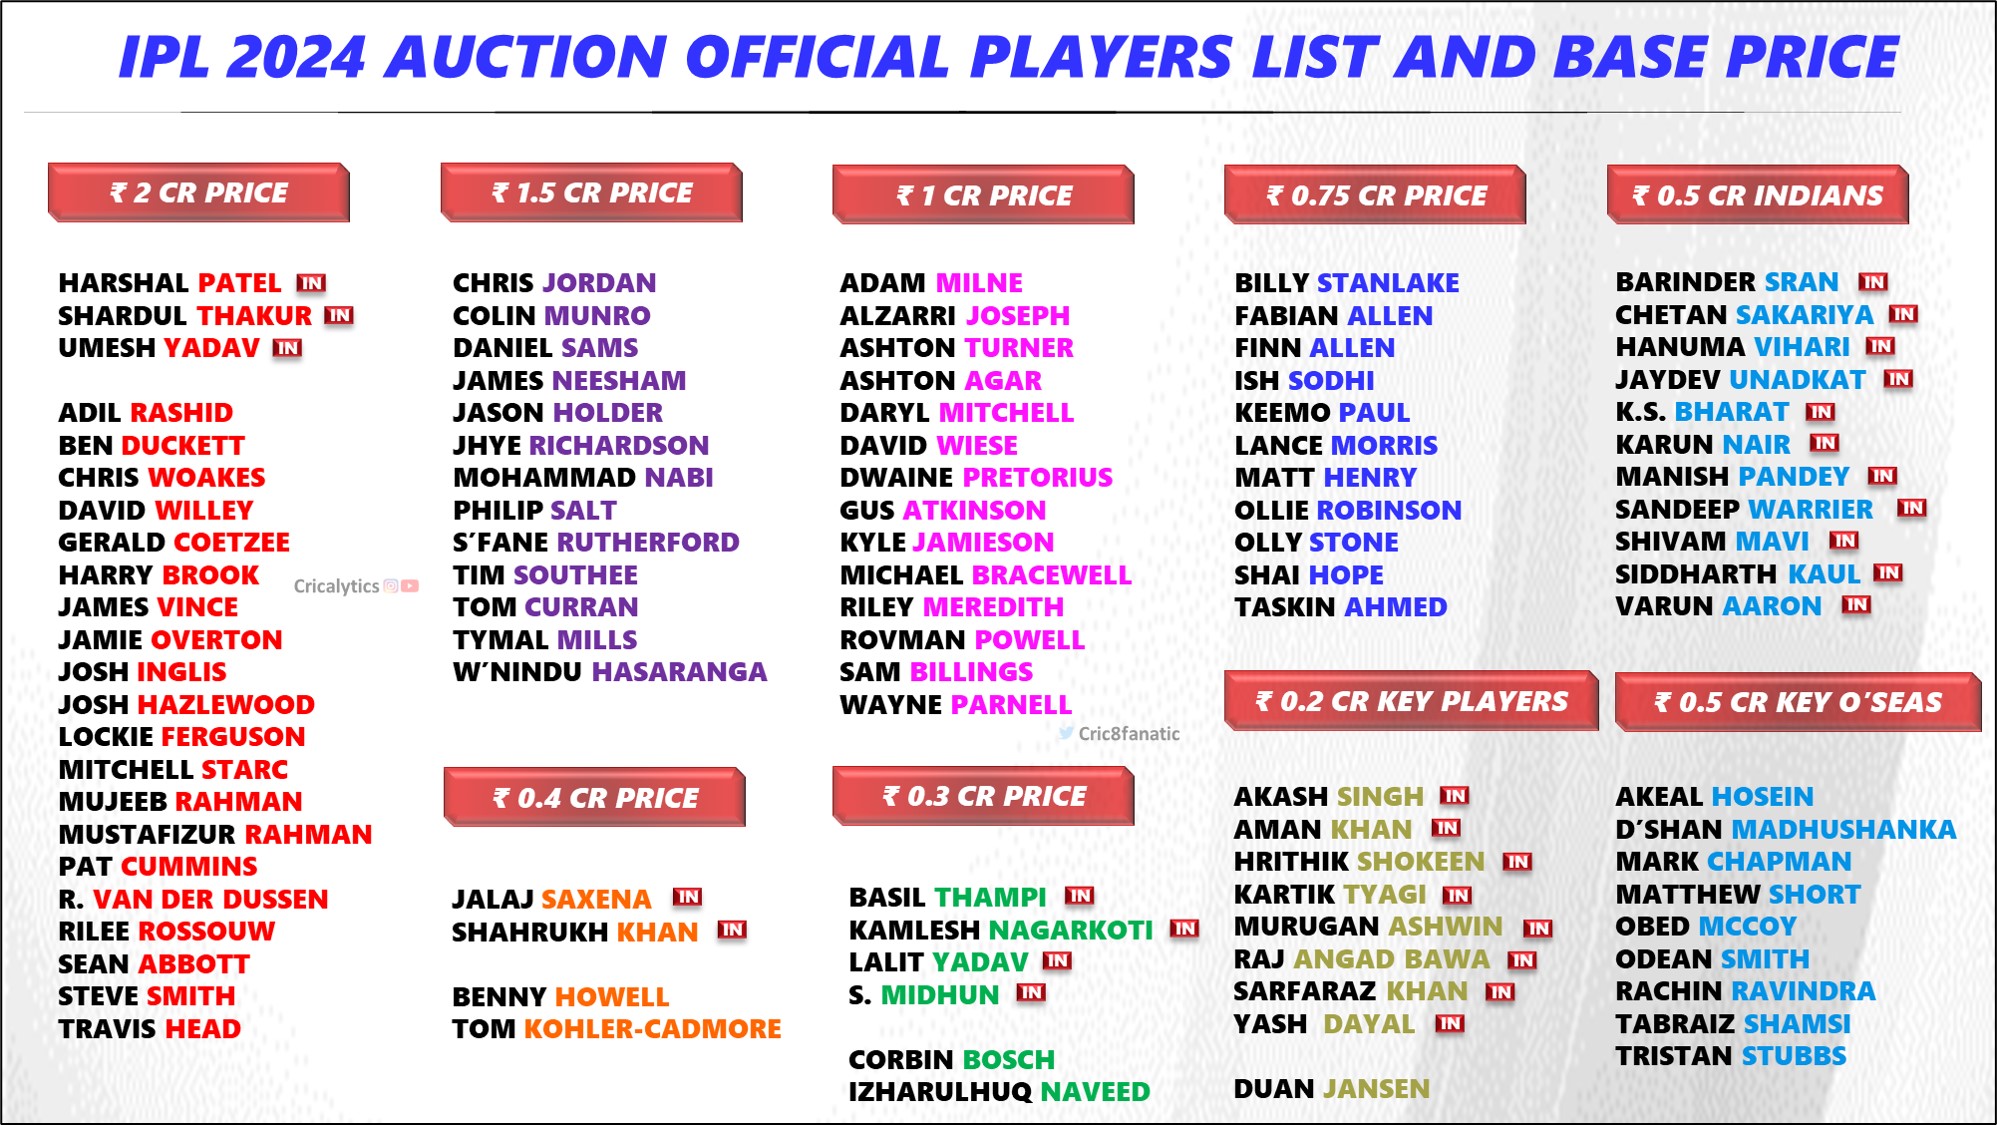 IPL 2024 Auction Players List and Complete Price Details